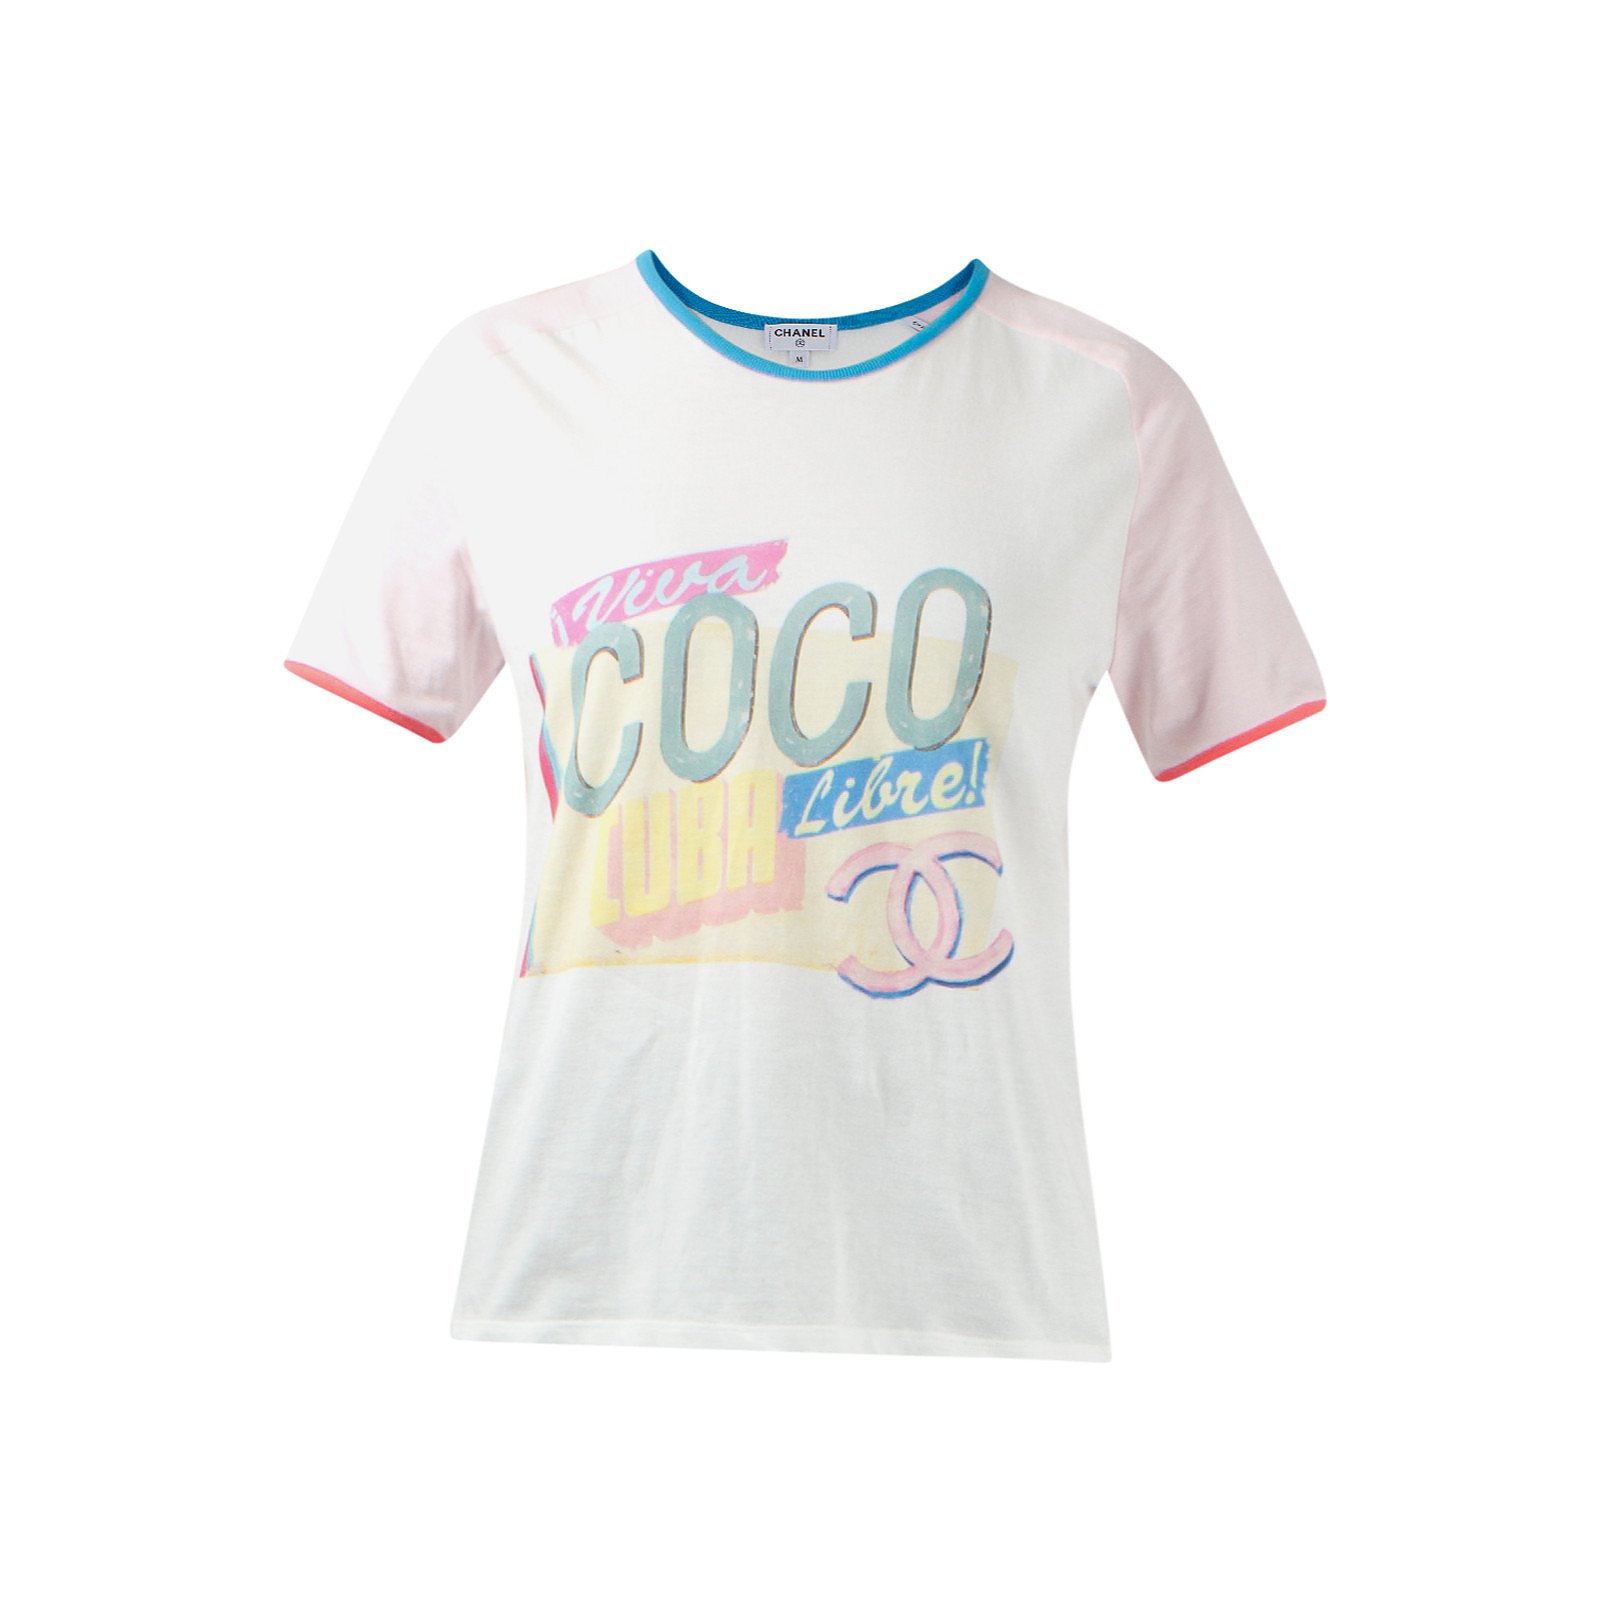 Chanel Coco Cuba shirt white pastel pink sleeves  wwwchanelvintagenet